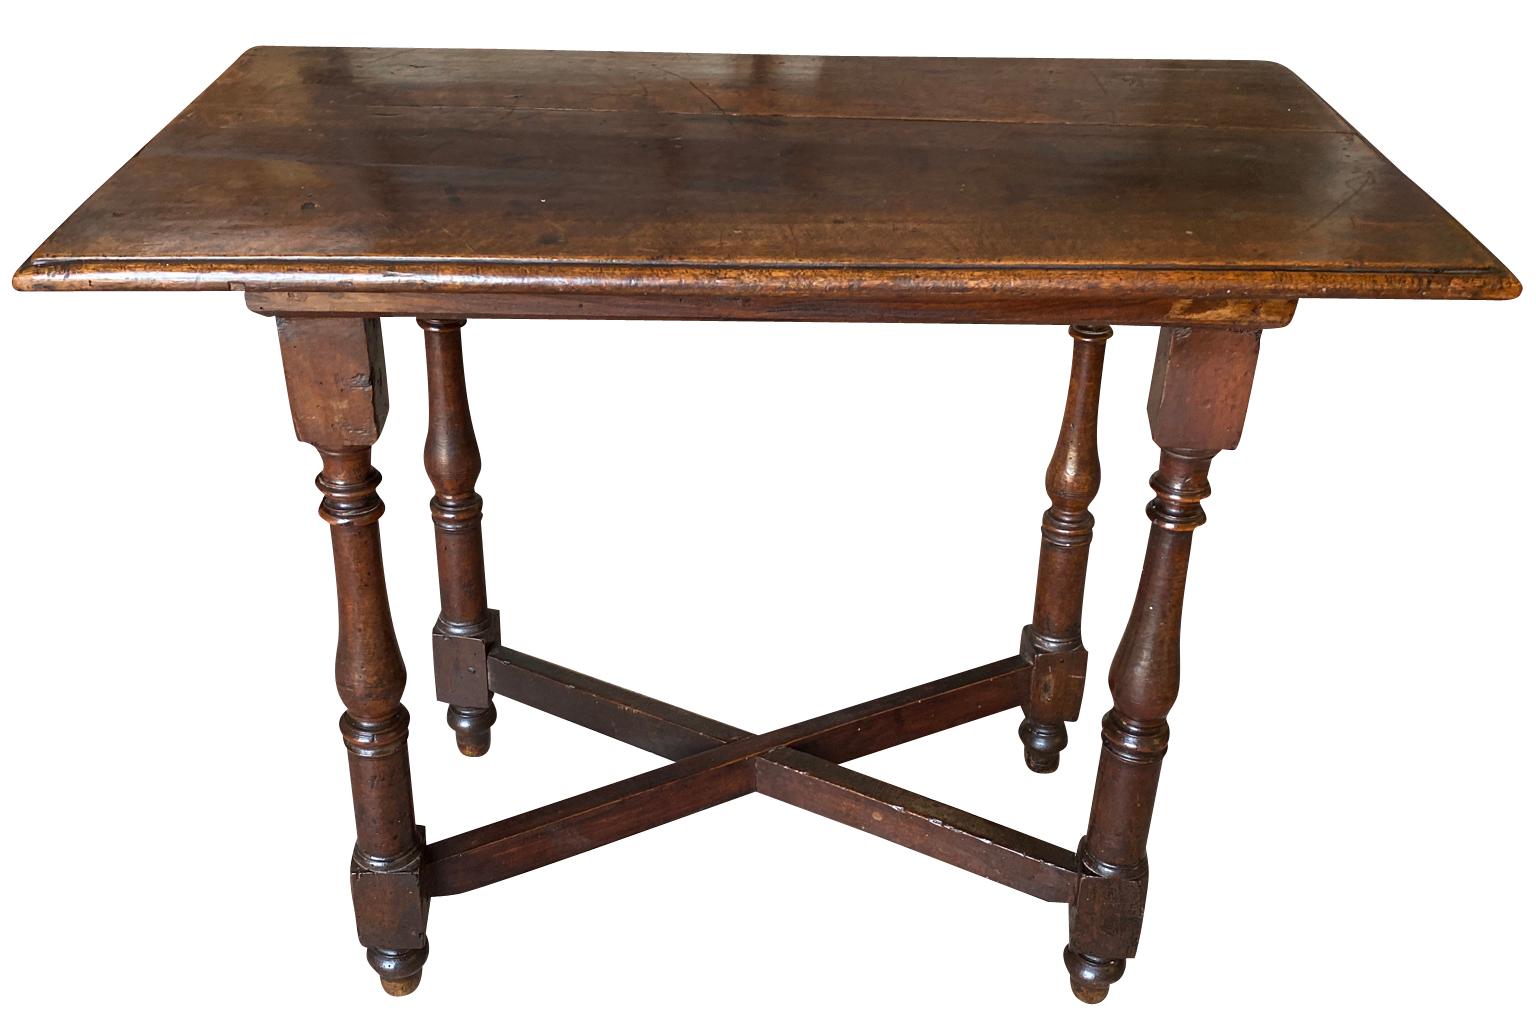 A very charming 18th century Side Table from the Tuscany region. Beautifully constructed from handsome walnut with nicely turned legs and an 